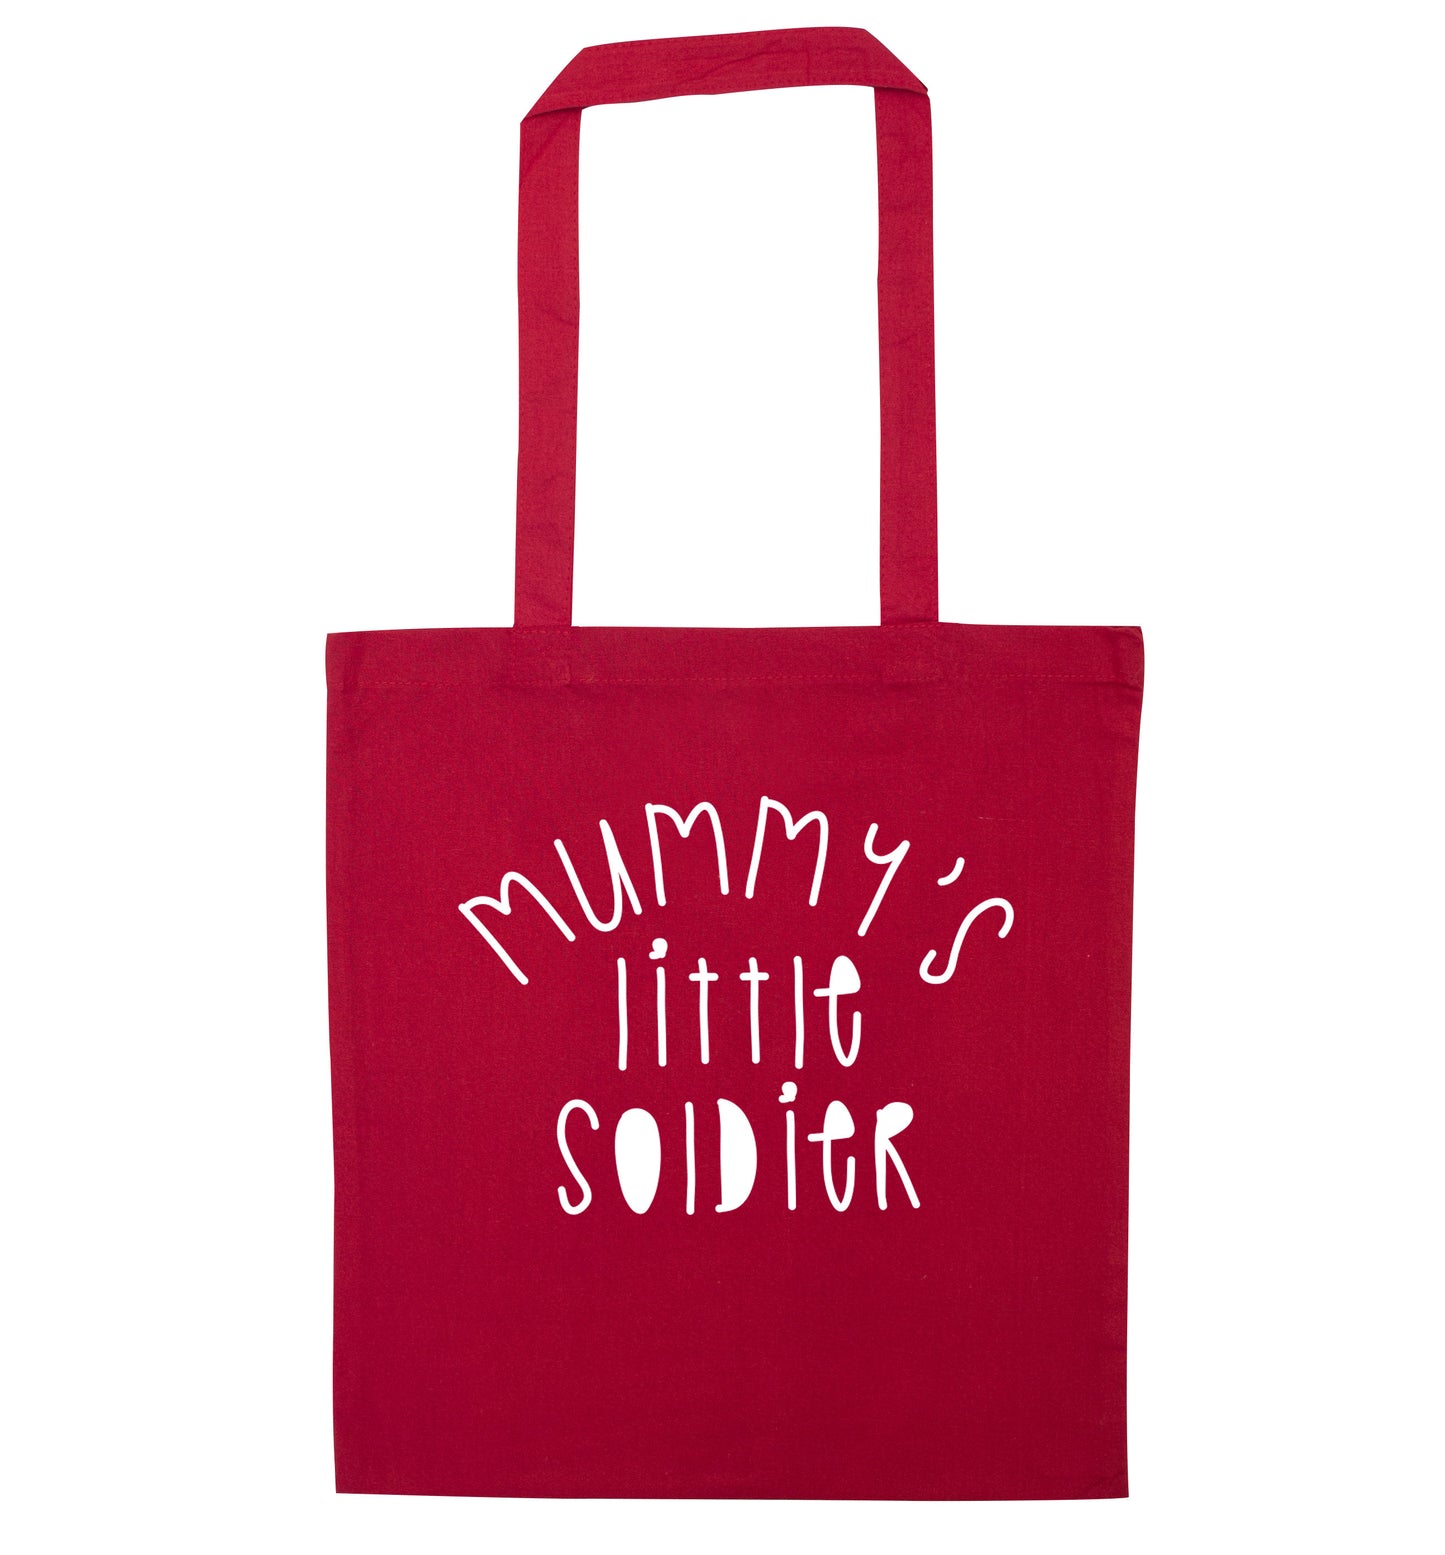 Mummy's little soldier red tote bag